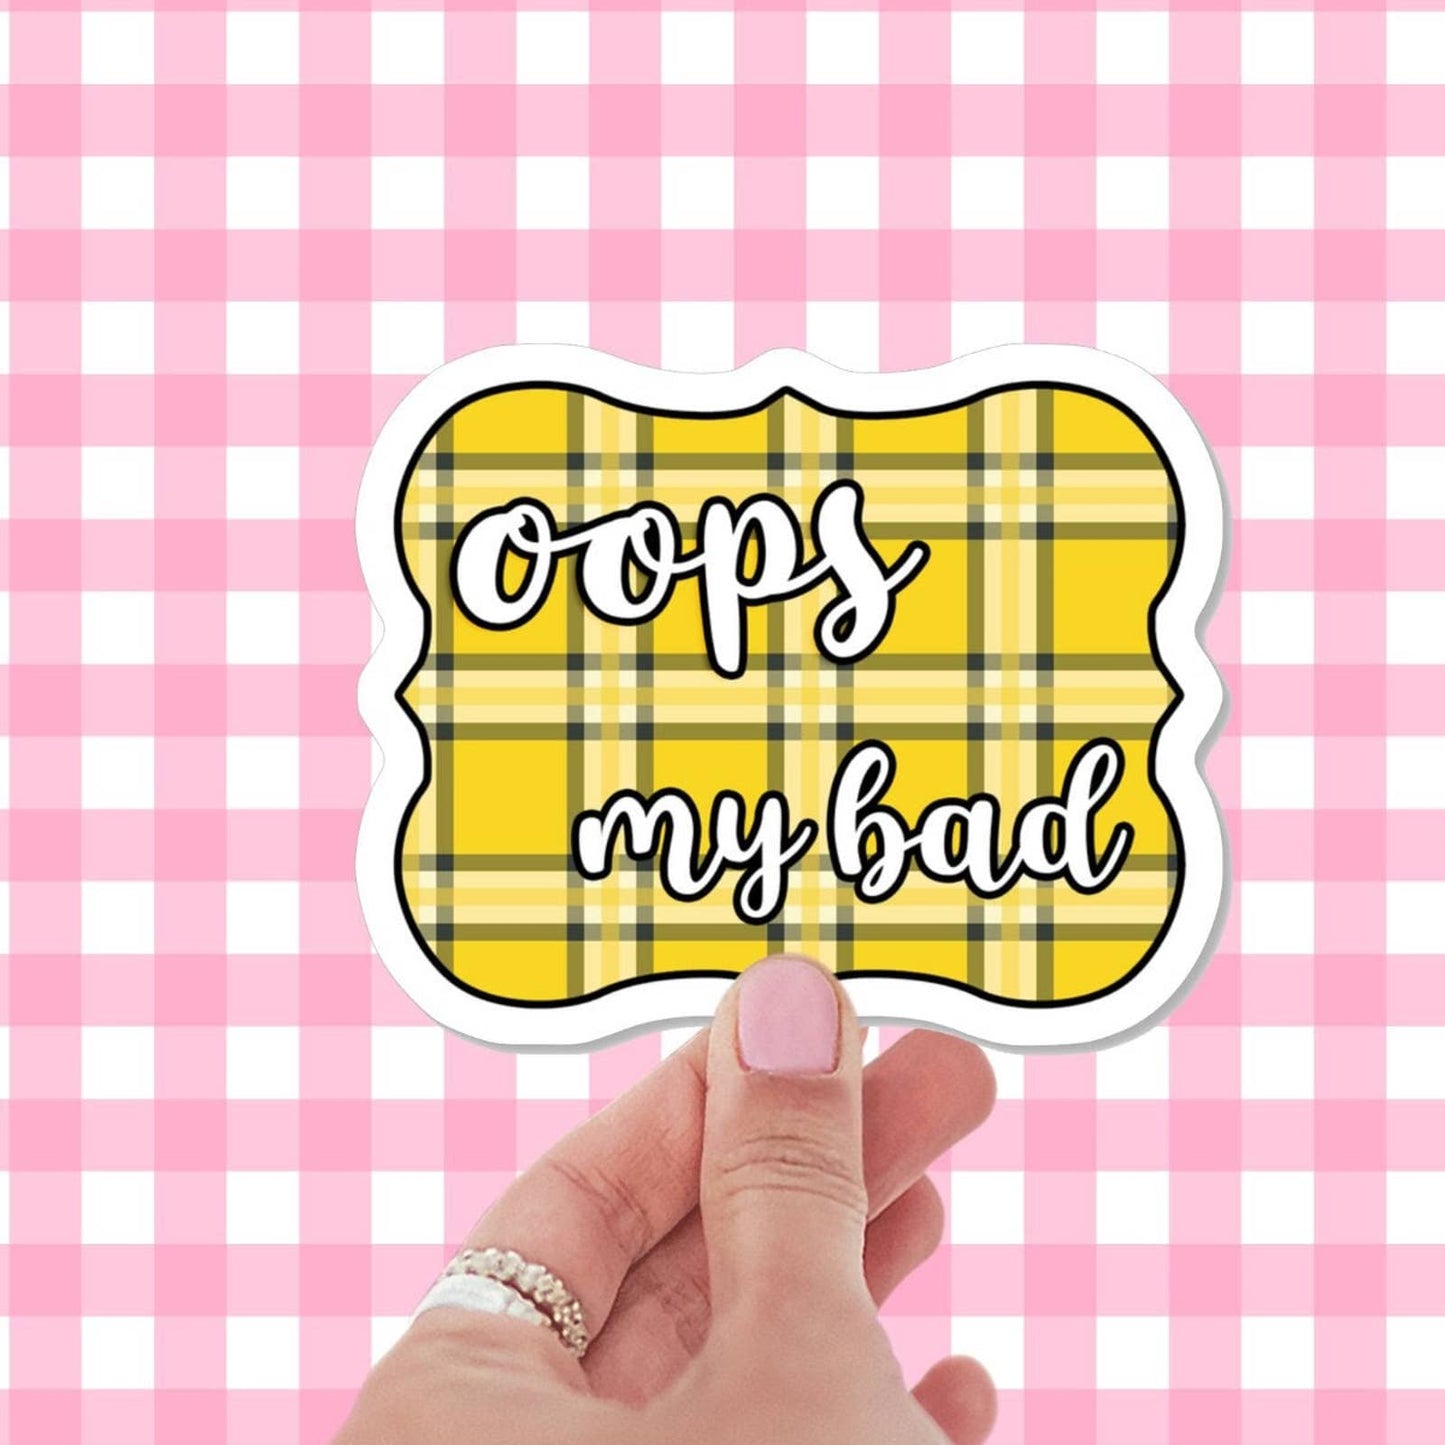 Oops My Bad sticker, funny stickers, stickers for laptop, stickers for book, 90s stickers, water bottle stickers, yellow plaid, aesthetic